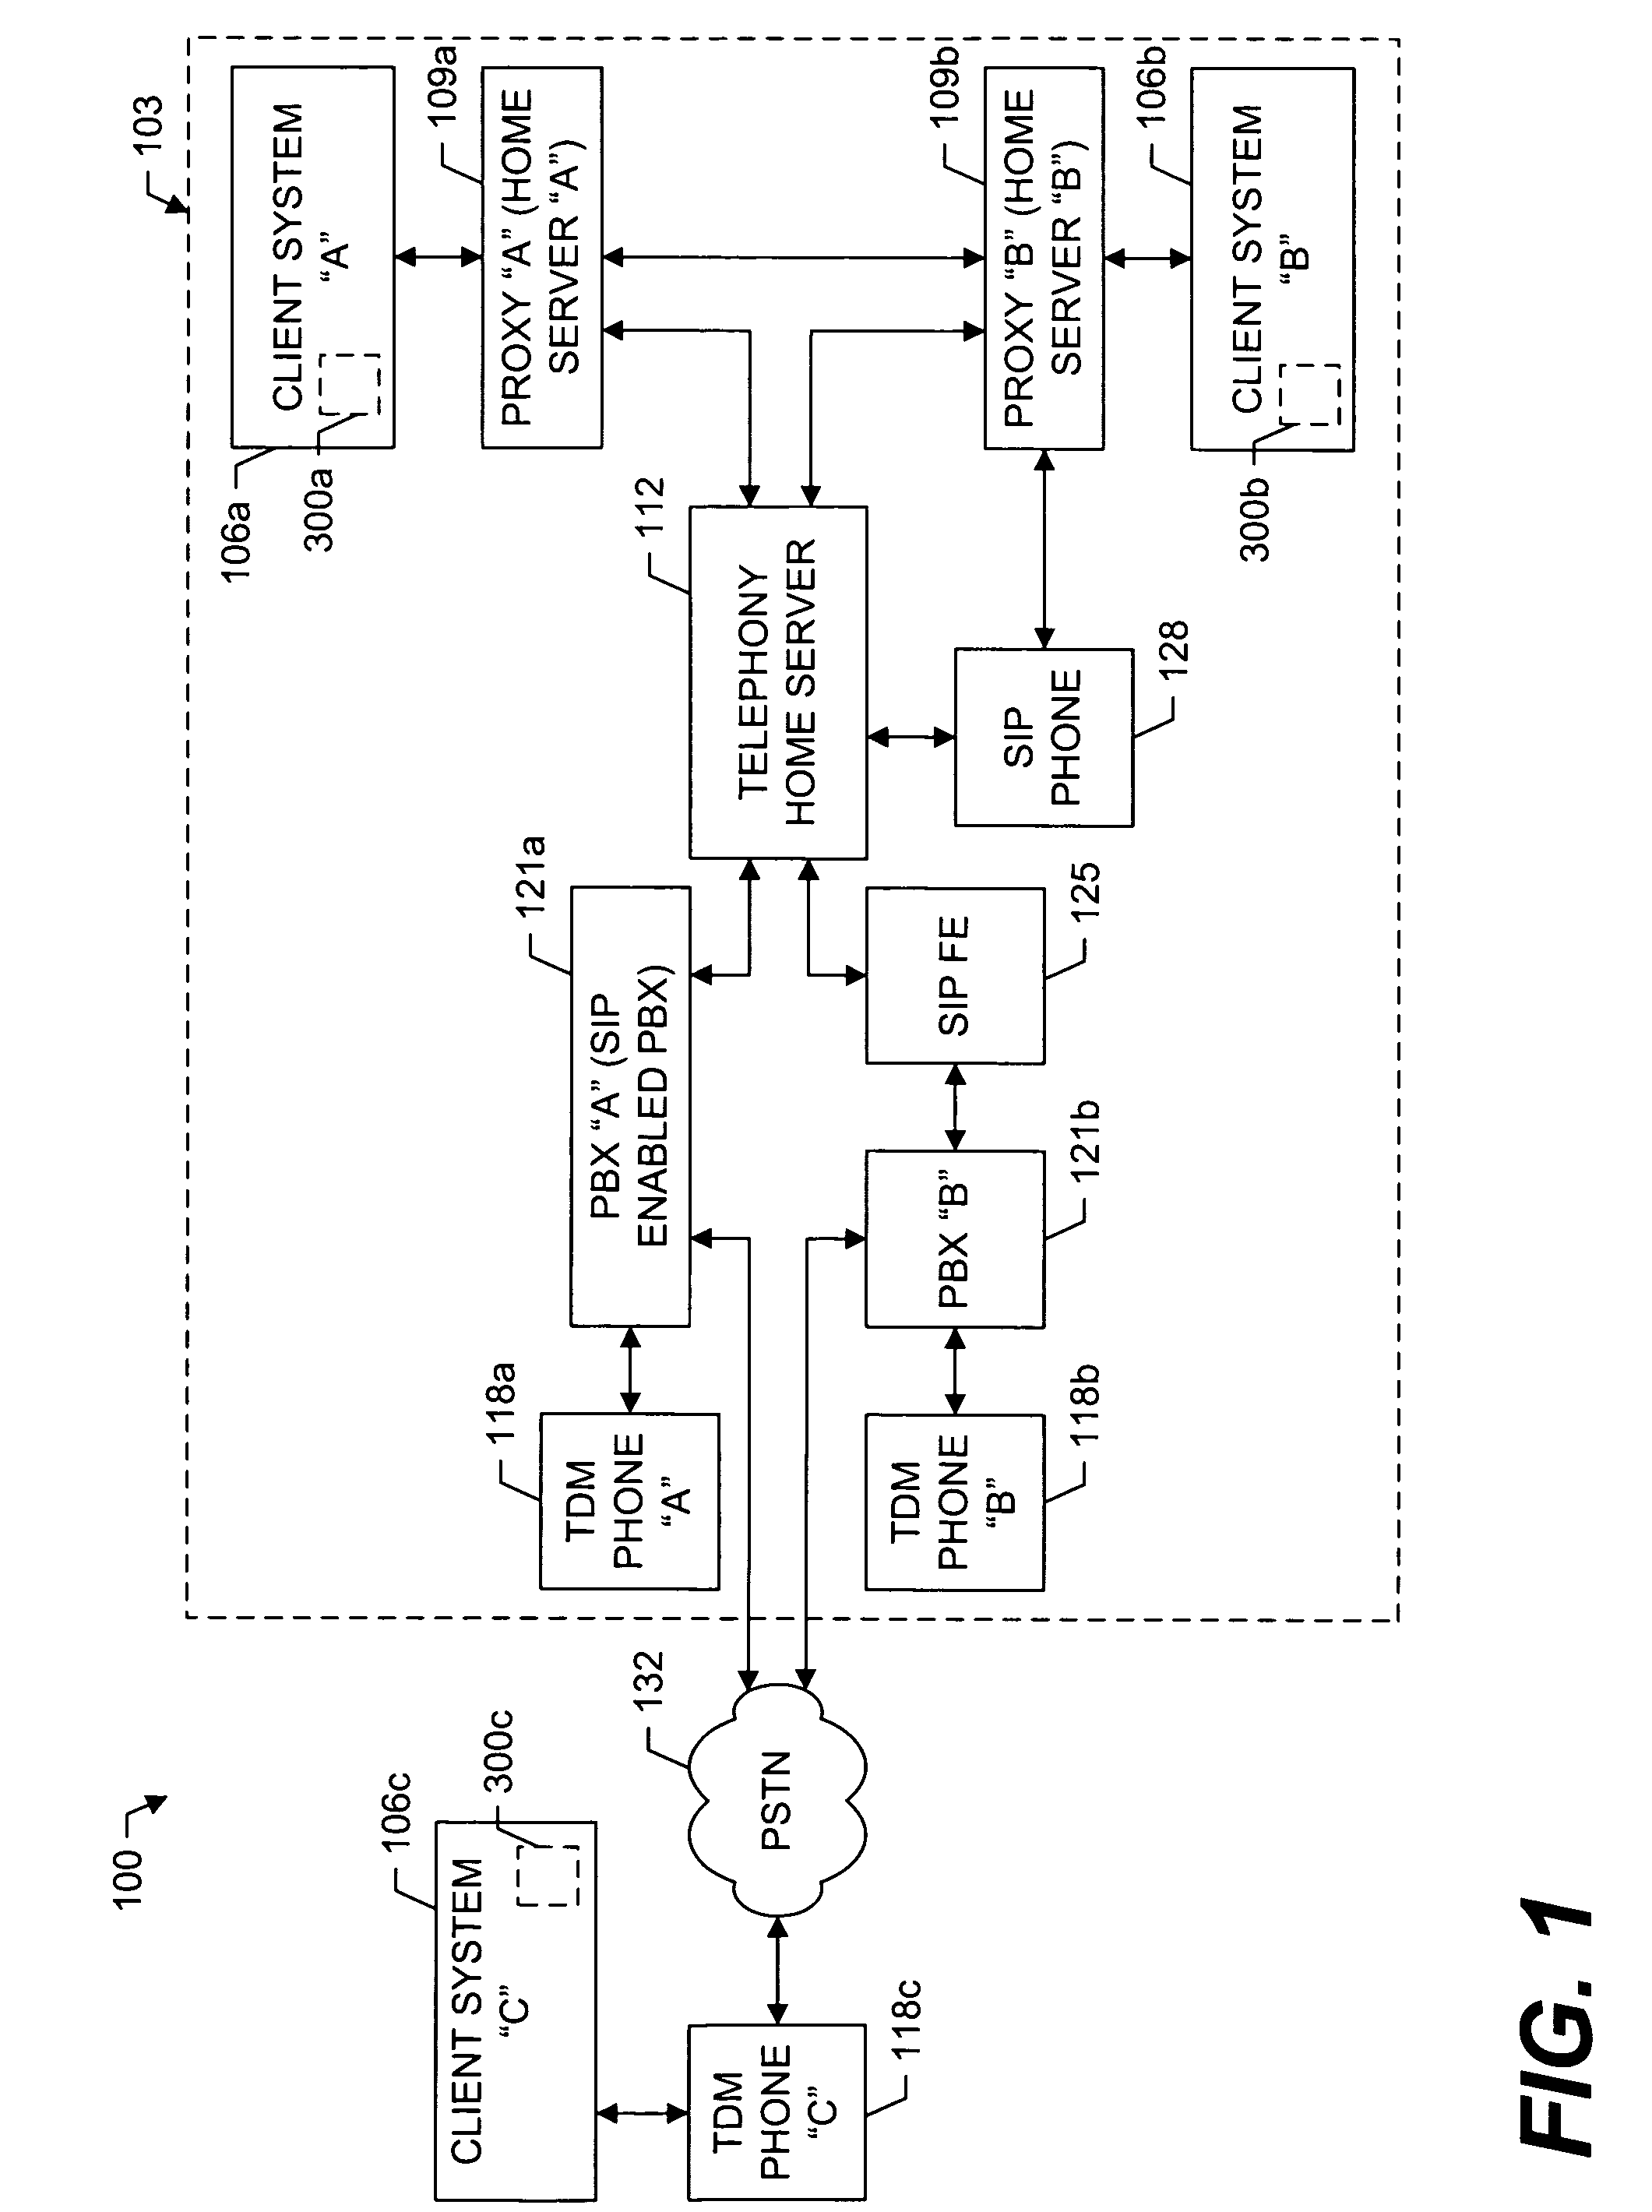 System and methods for facilitating third-party call and device control